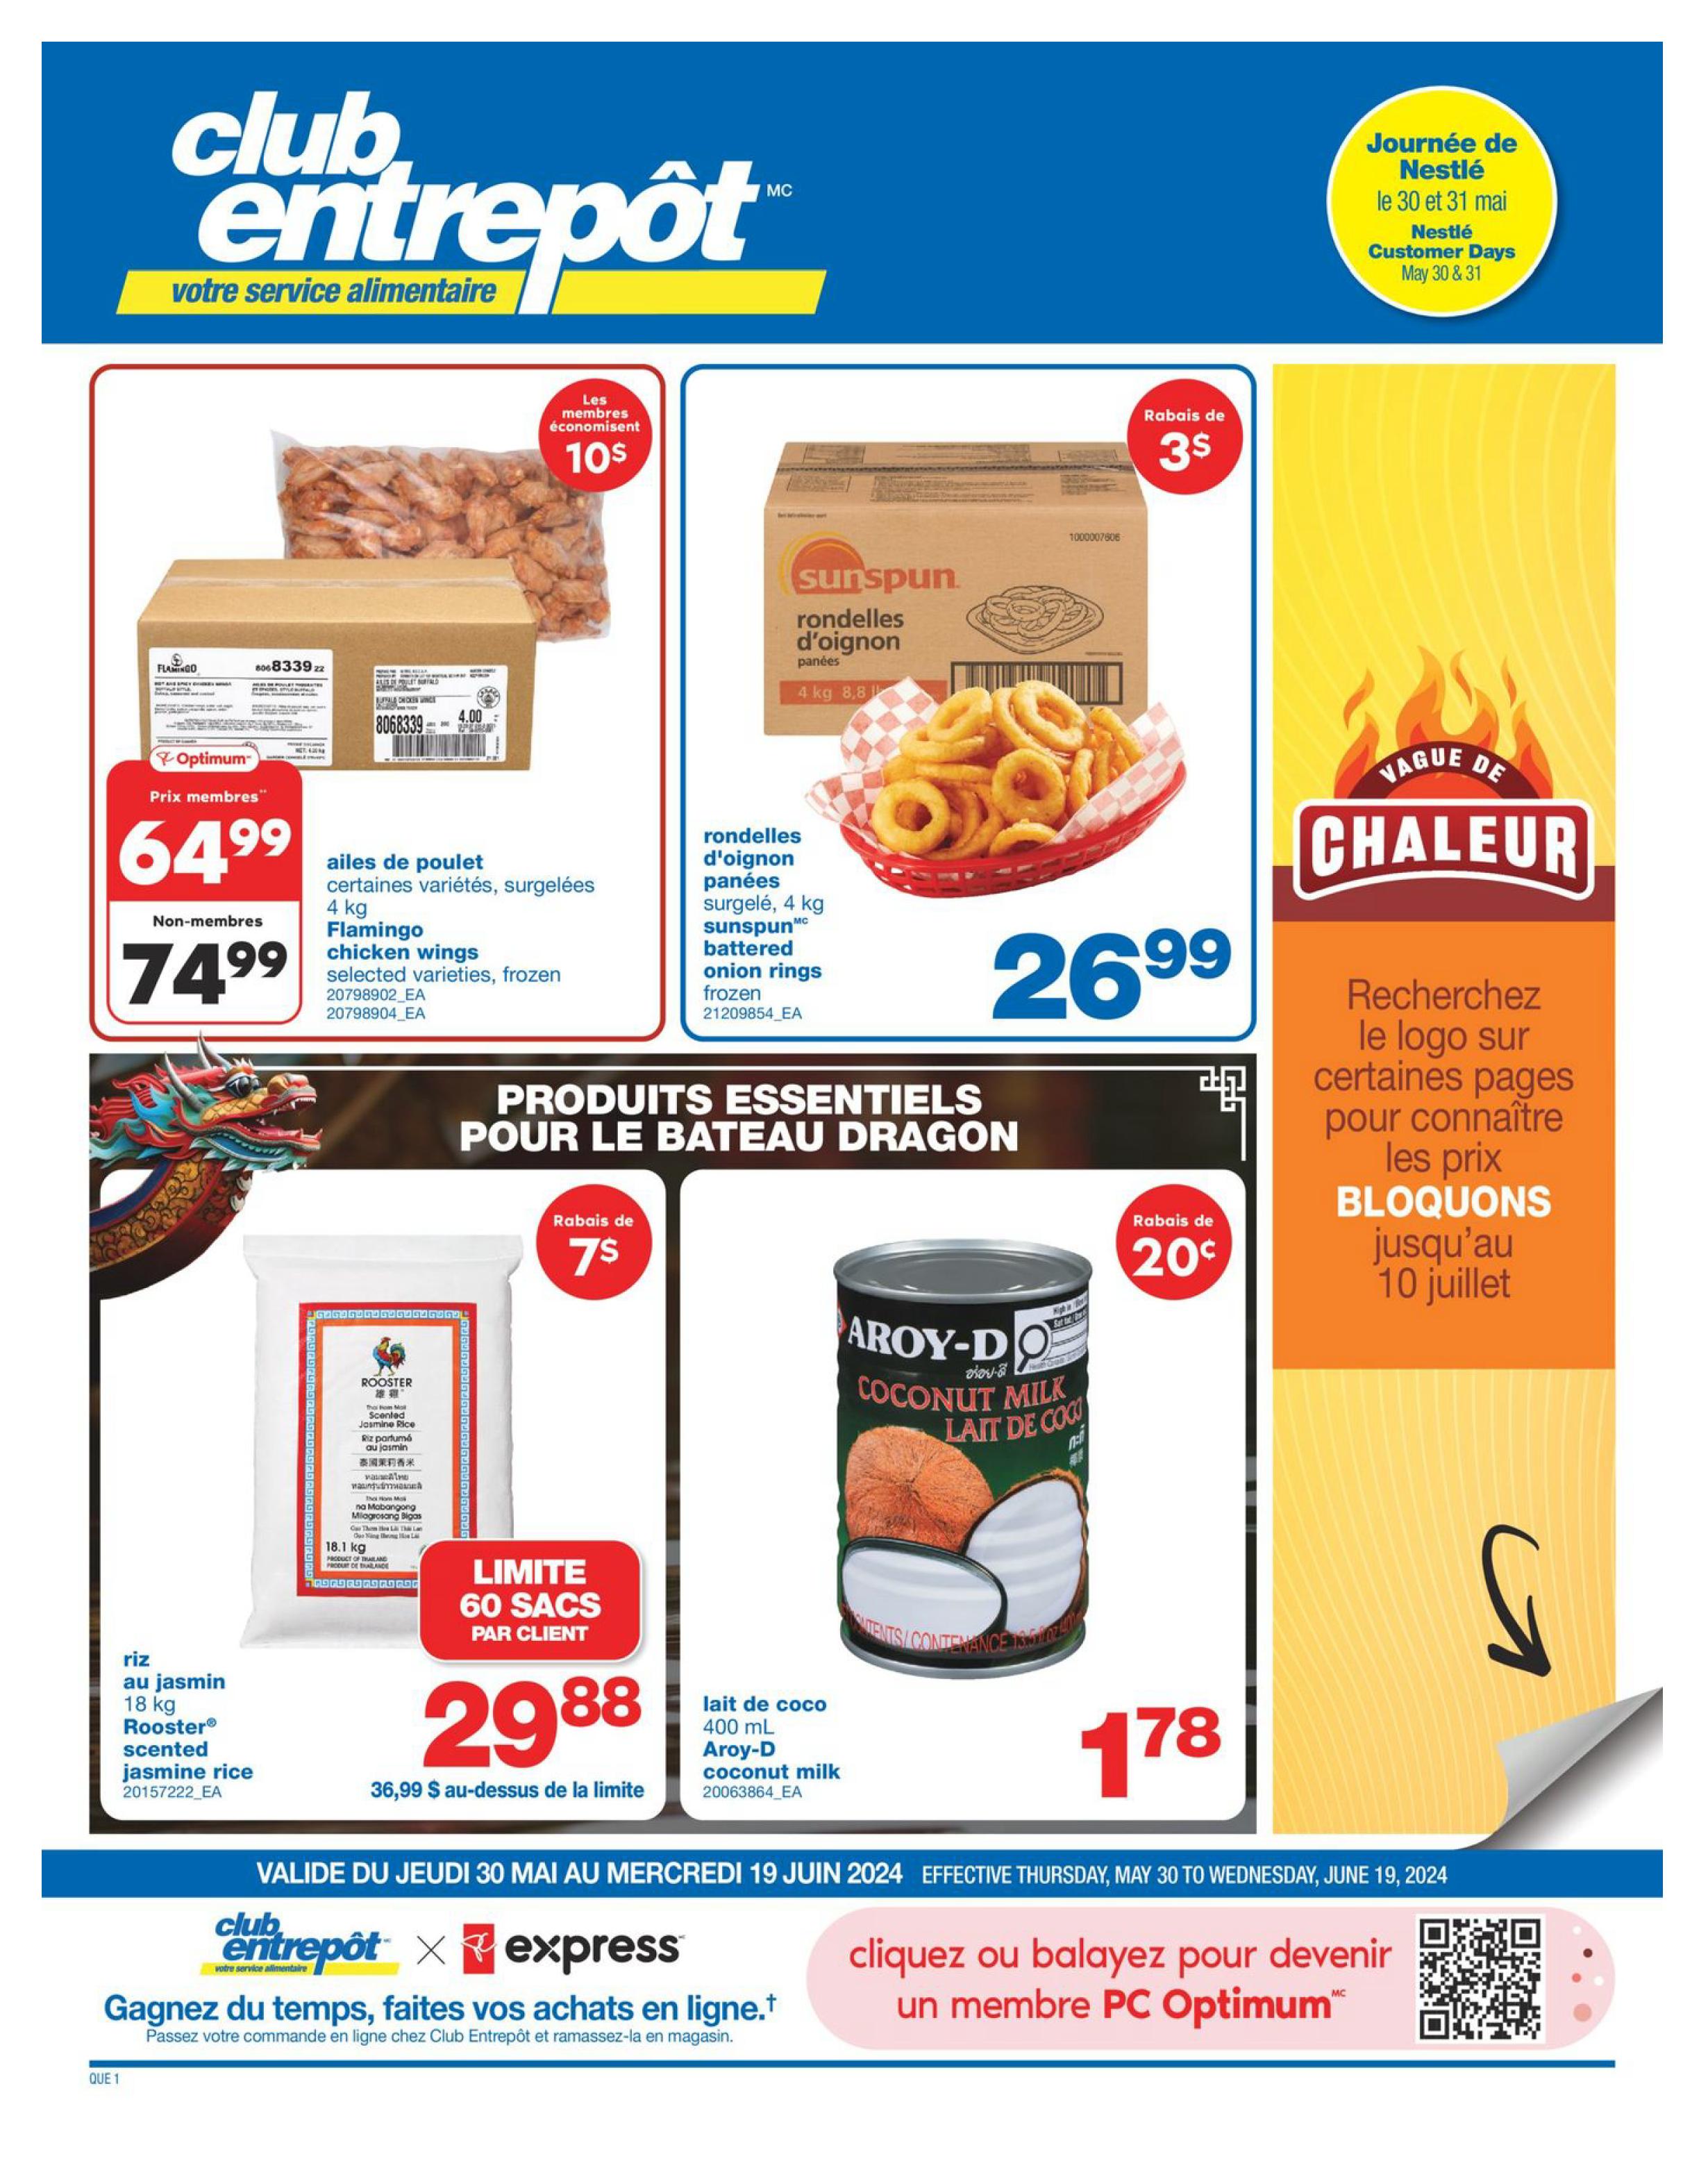 Wholesale Club - Quebec - Monthly Savings